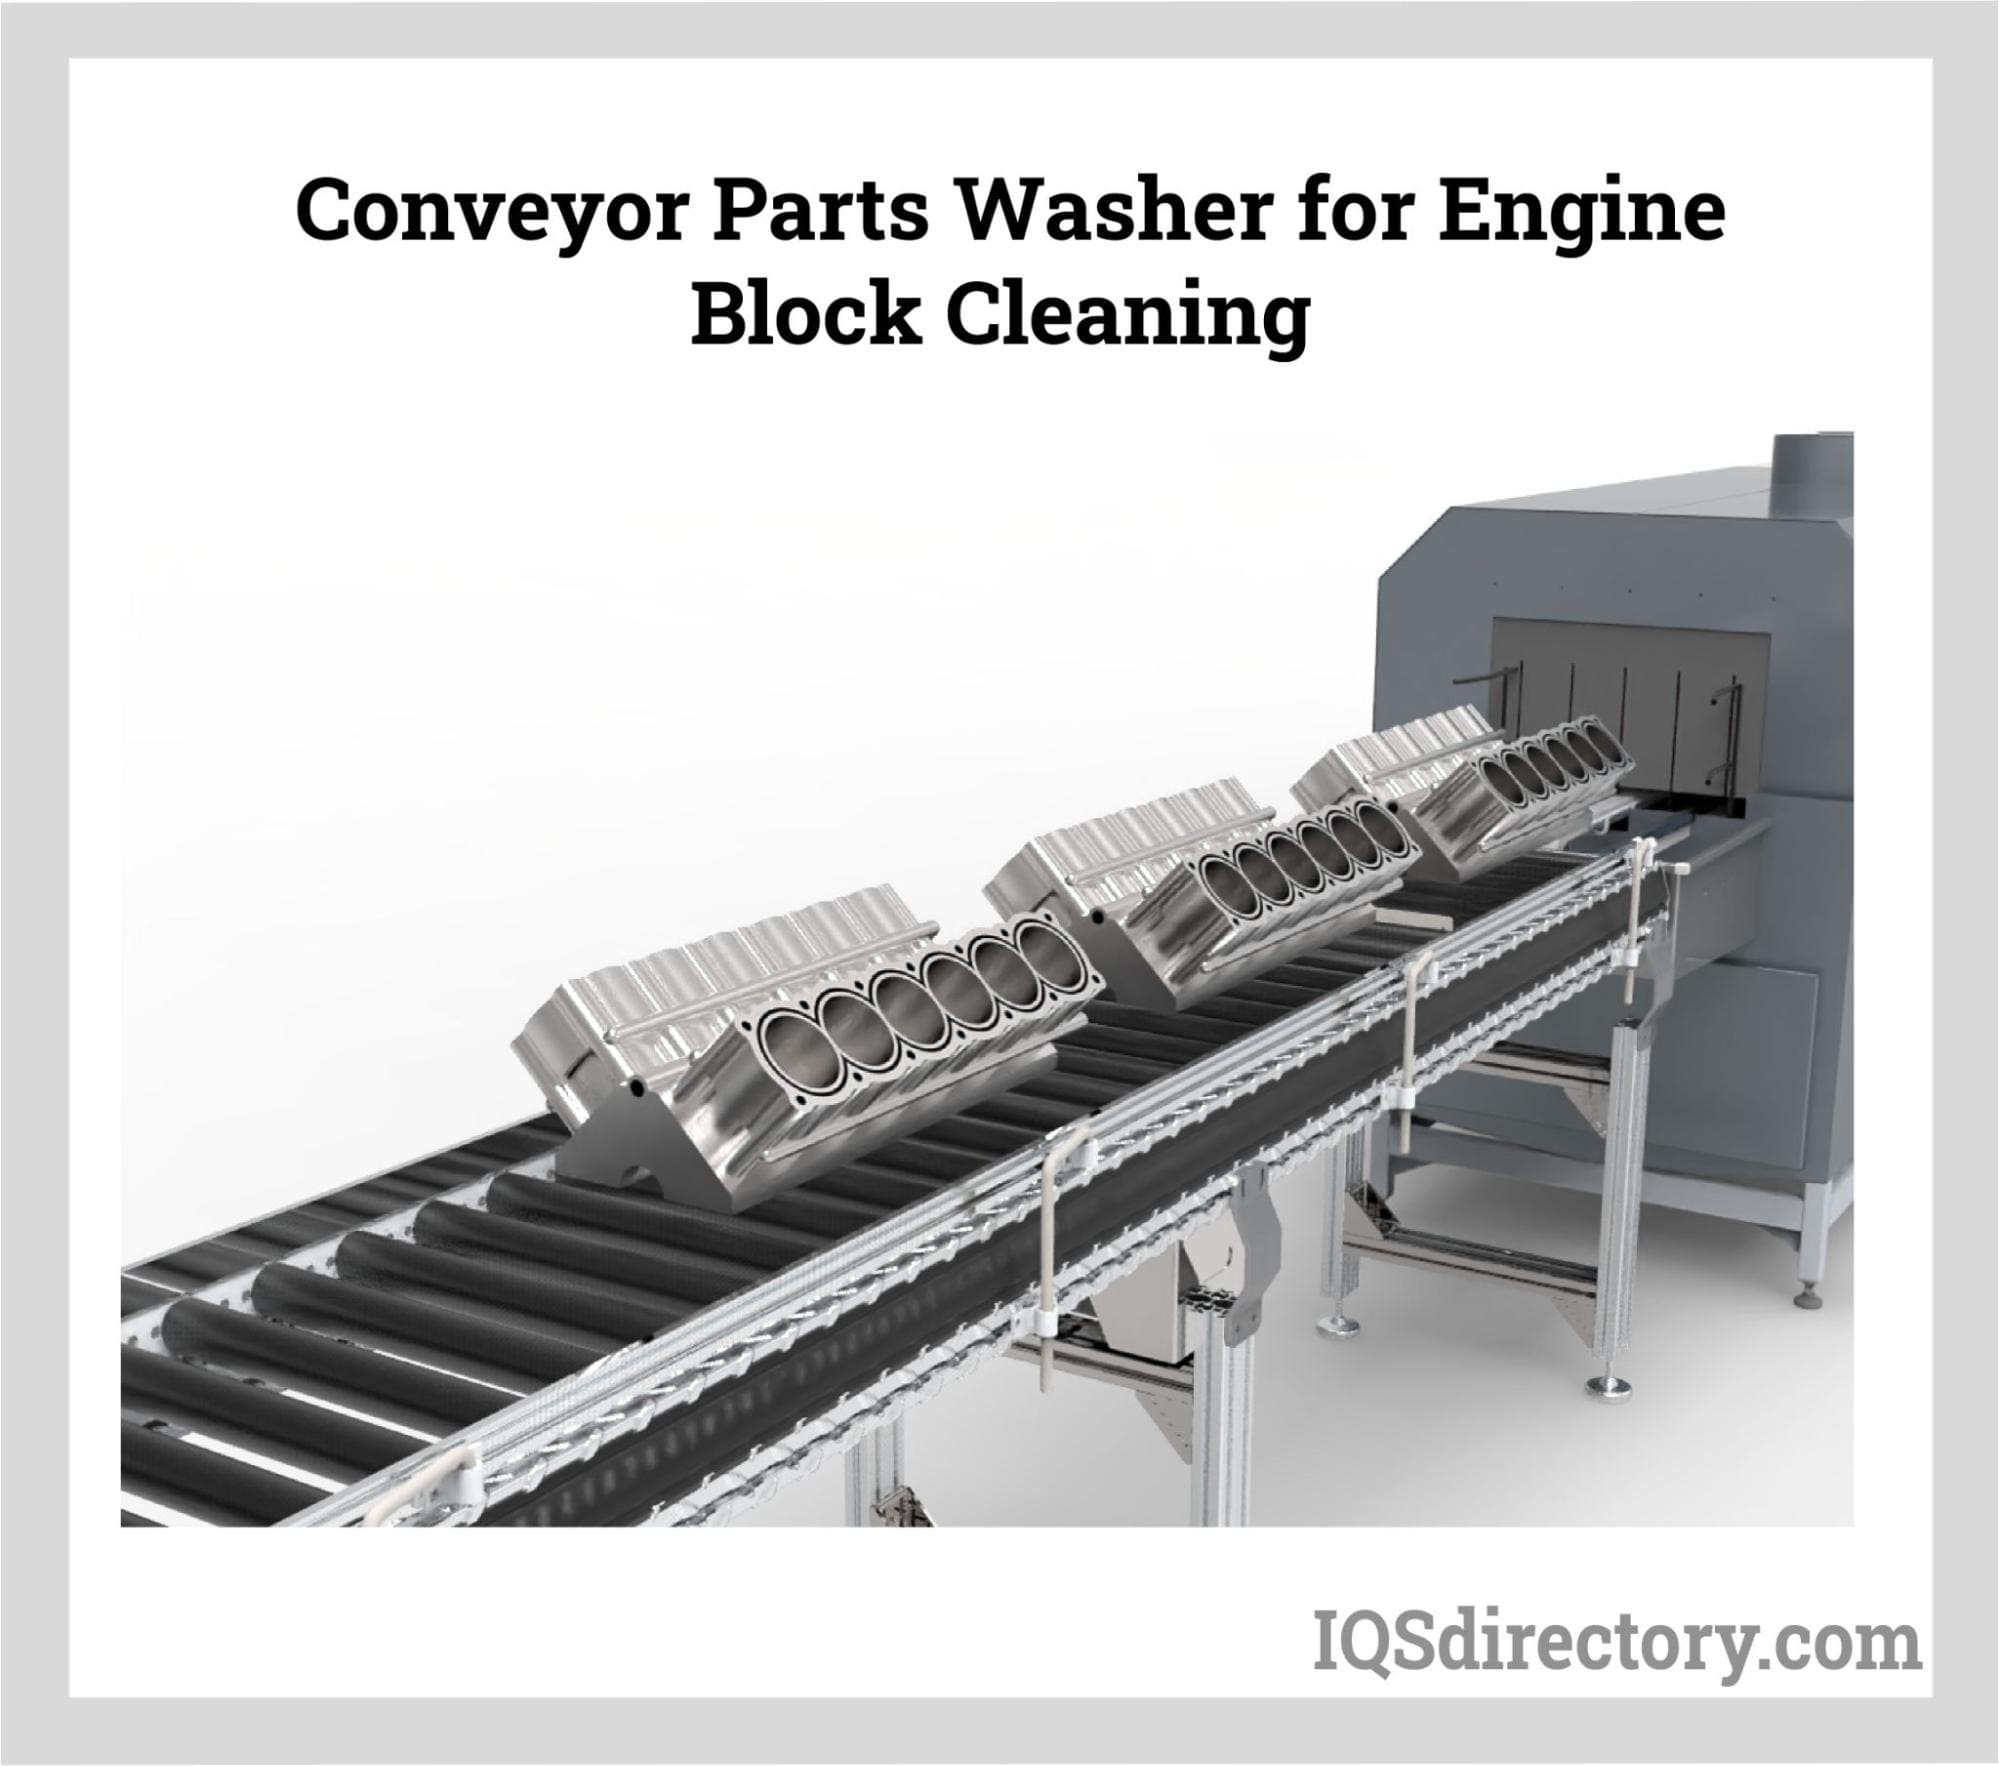 Conveyor Parts Washer for Engine Block Cleaning